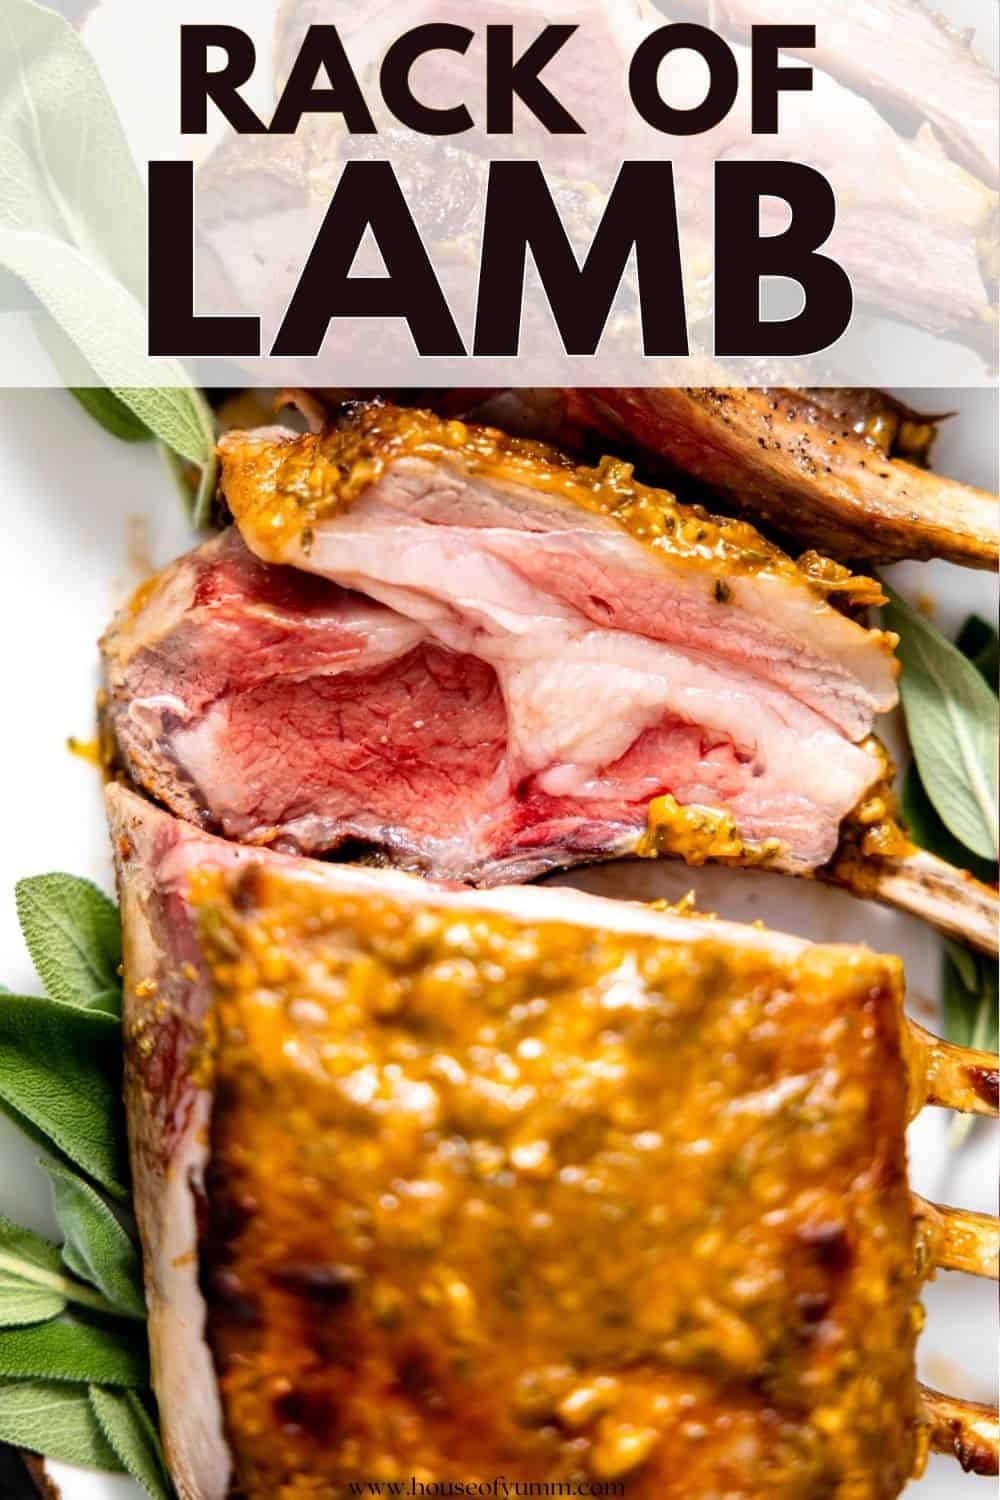 Rack of lamb with text.